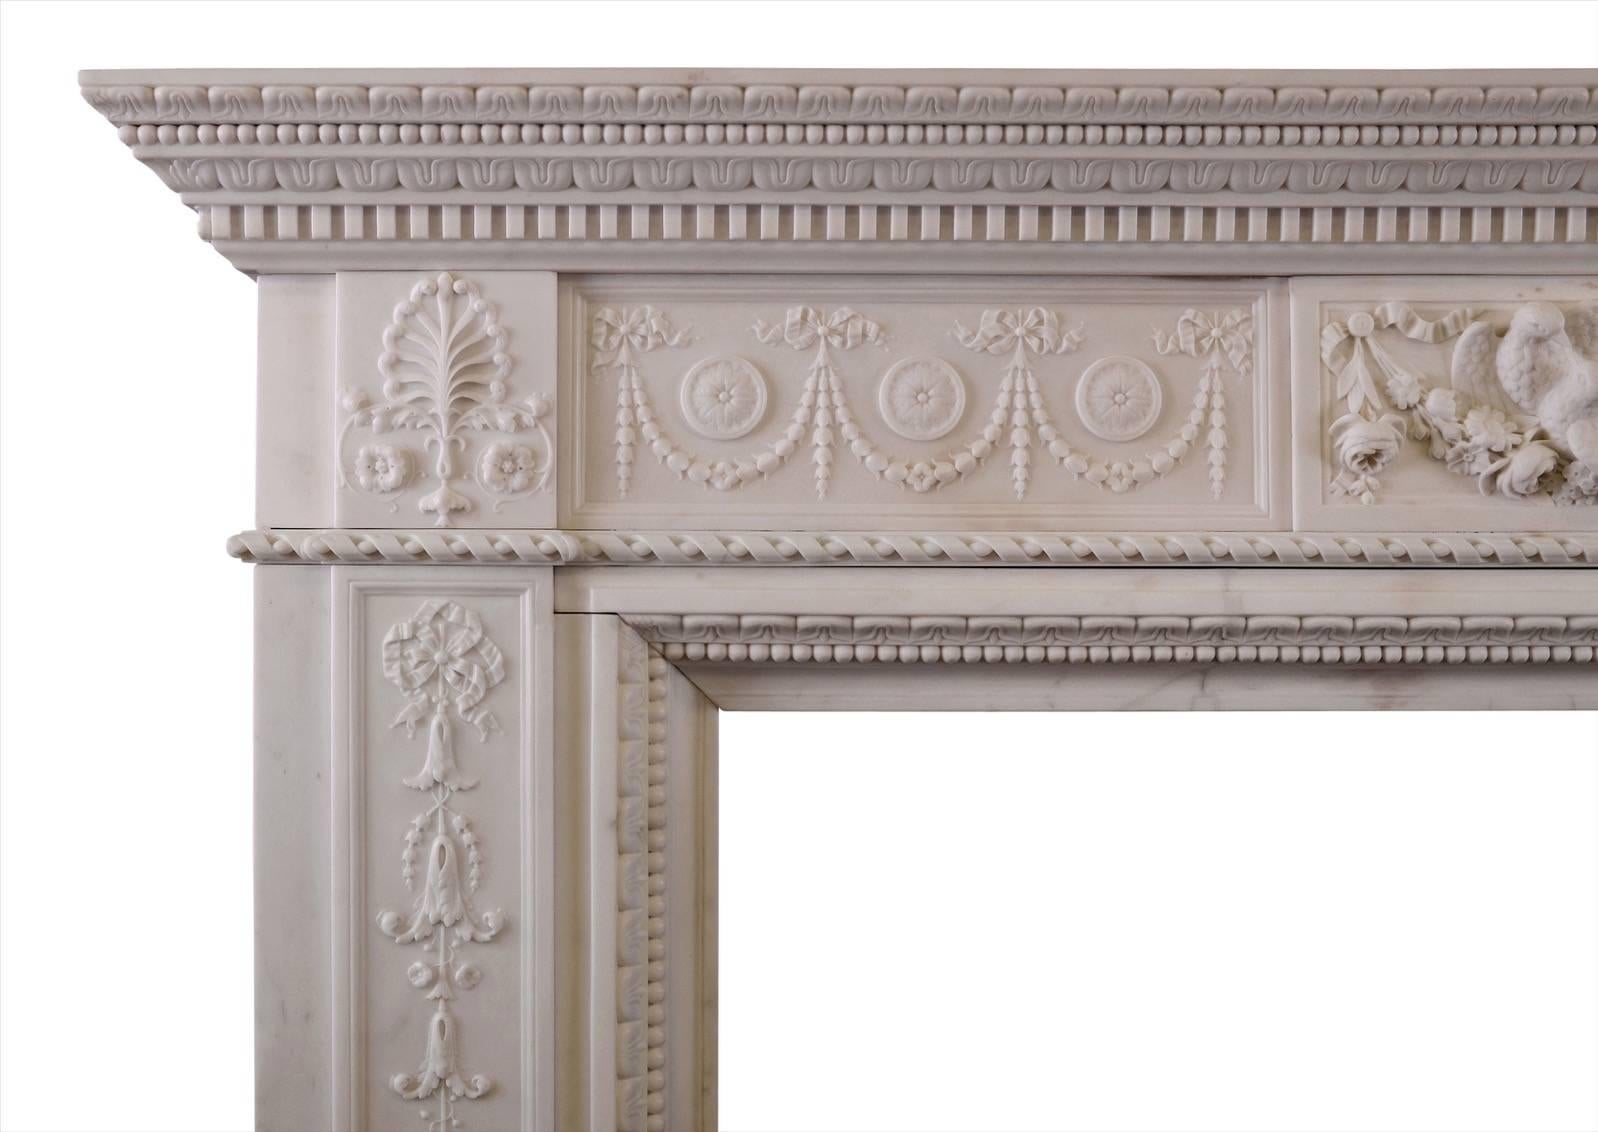 A fine quality statuary marble late Georgian fireplace. The panelled jambs with finely carved bellflowers and ribbons, surmounted by rope moulding and end blocks with anthemion leaf. The frieze with rosette paterae and drapery throughout, with